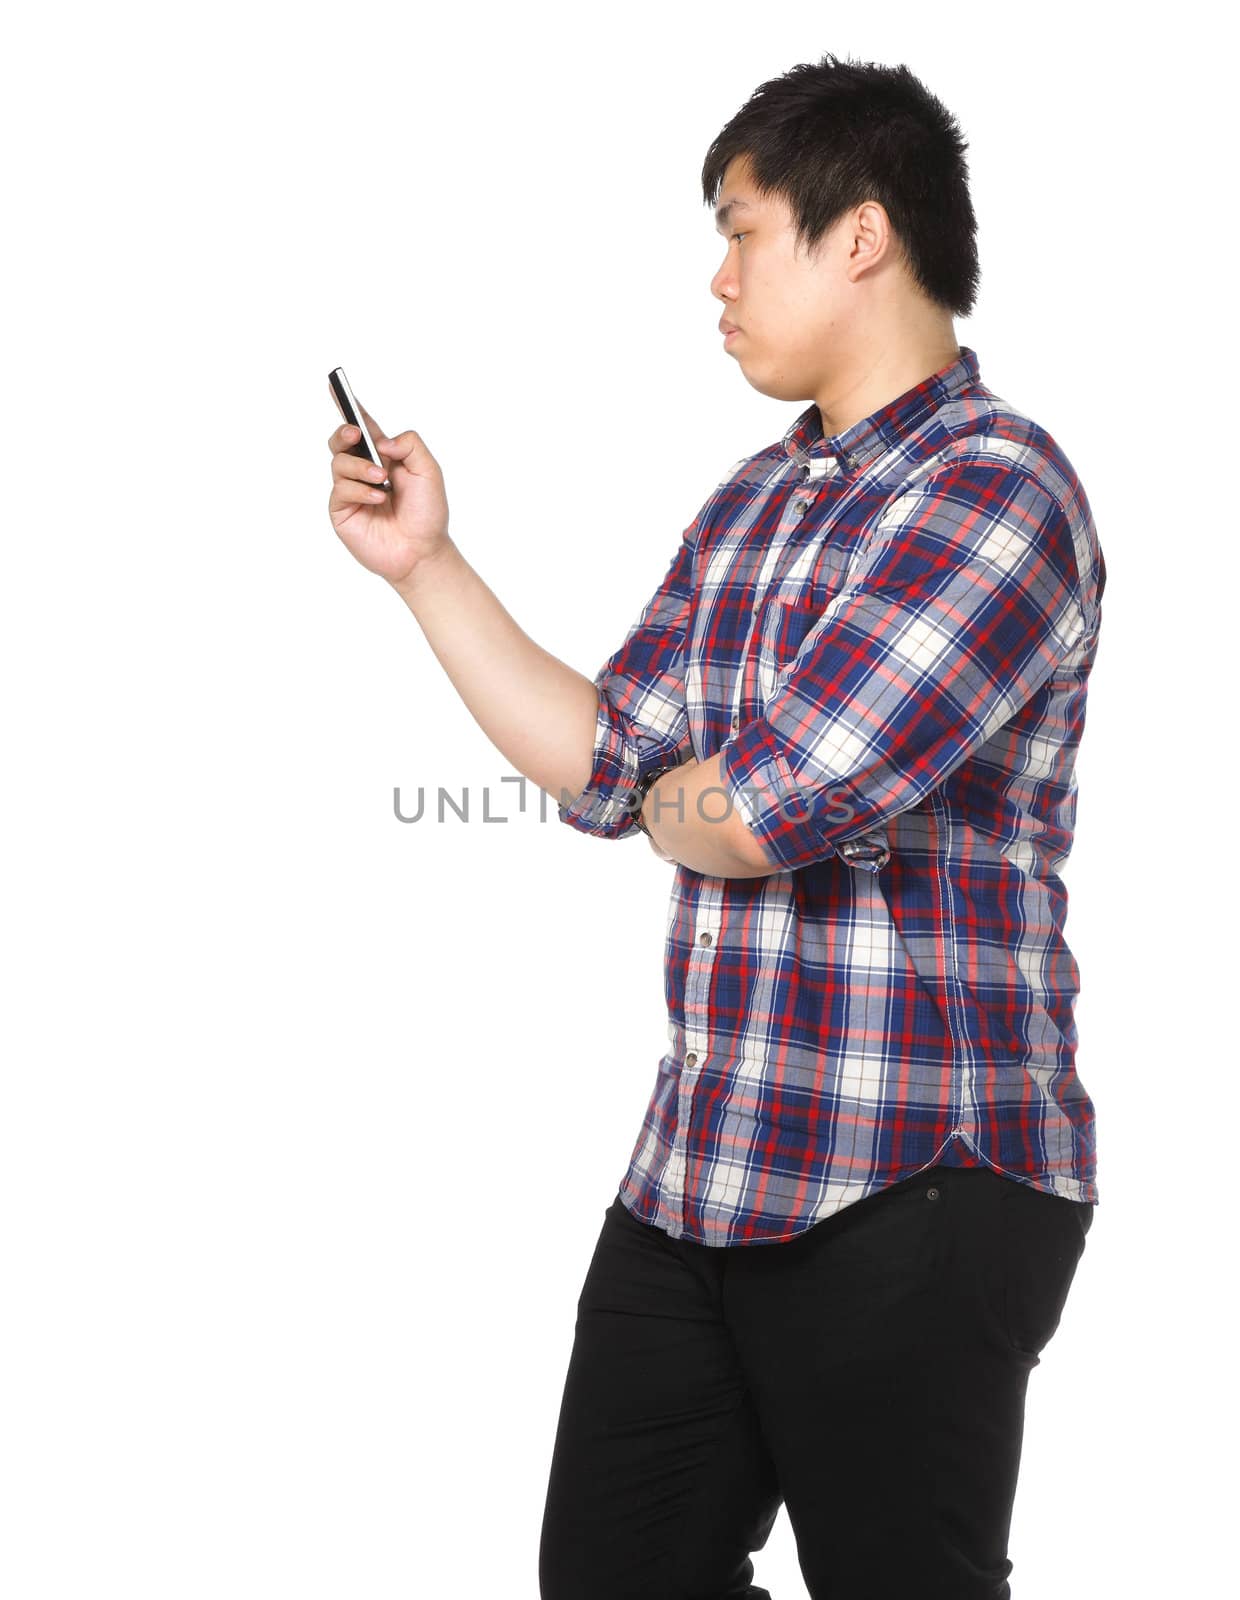 man sms on mobile phone by leungchopan